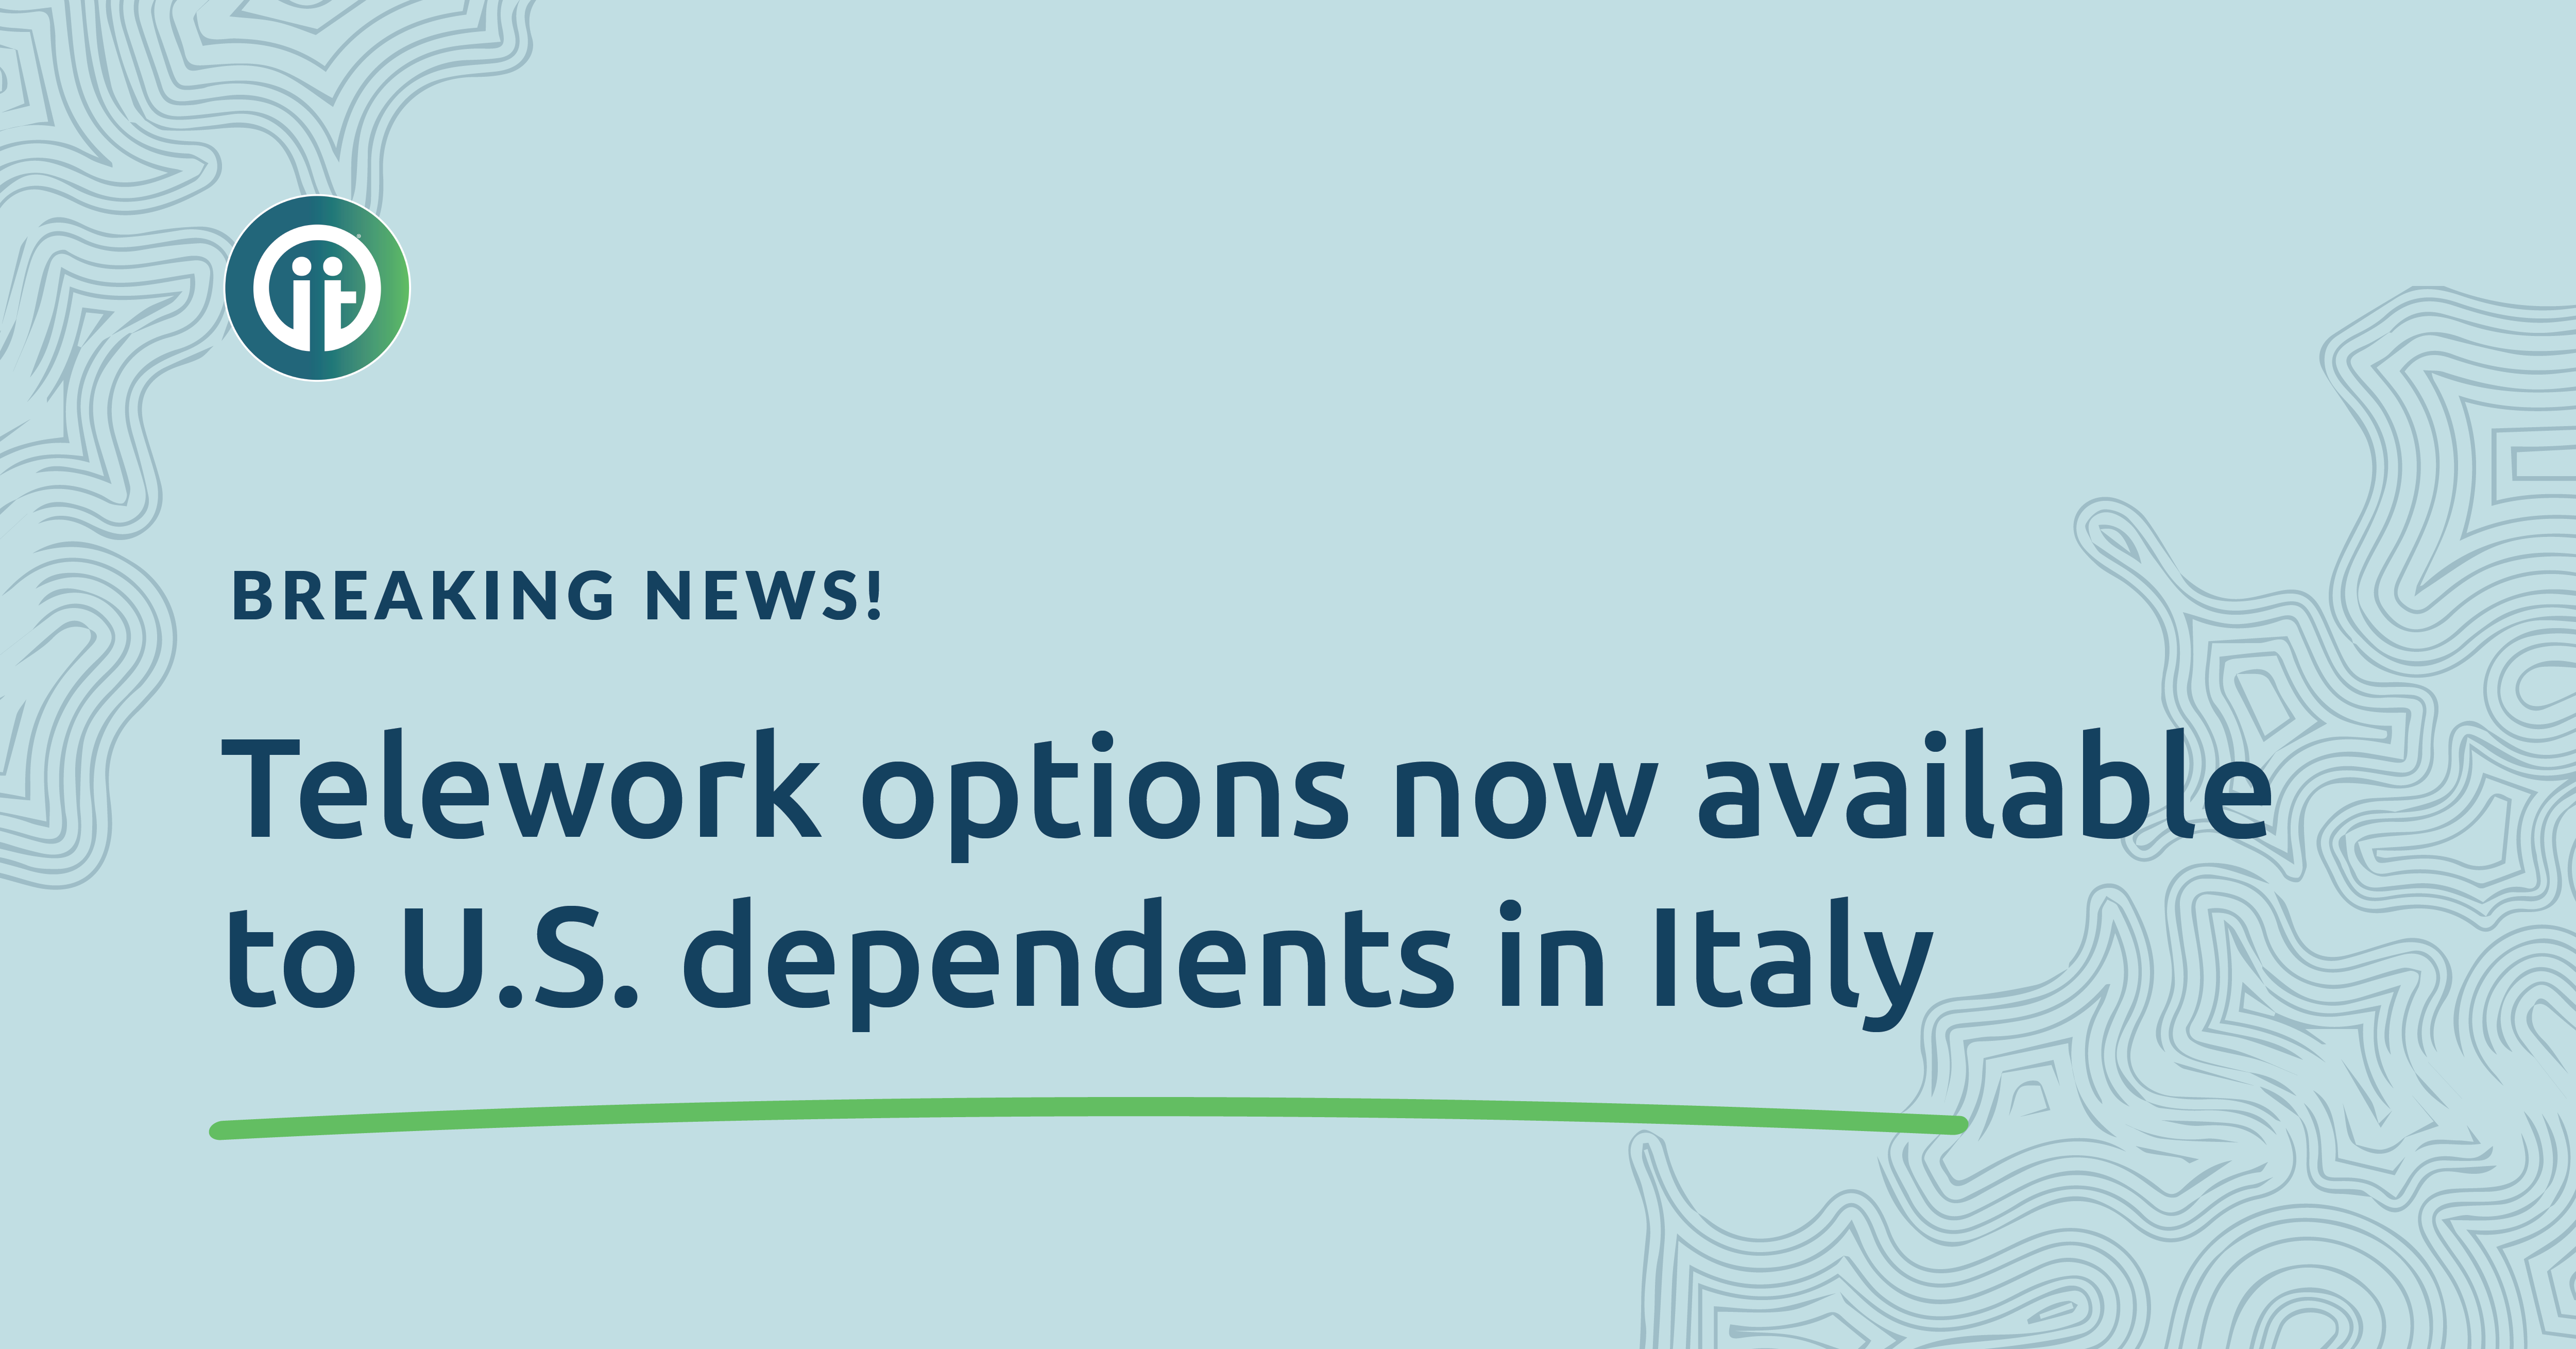 Remote work is now available to U.S. dependents stationed in Italy